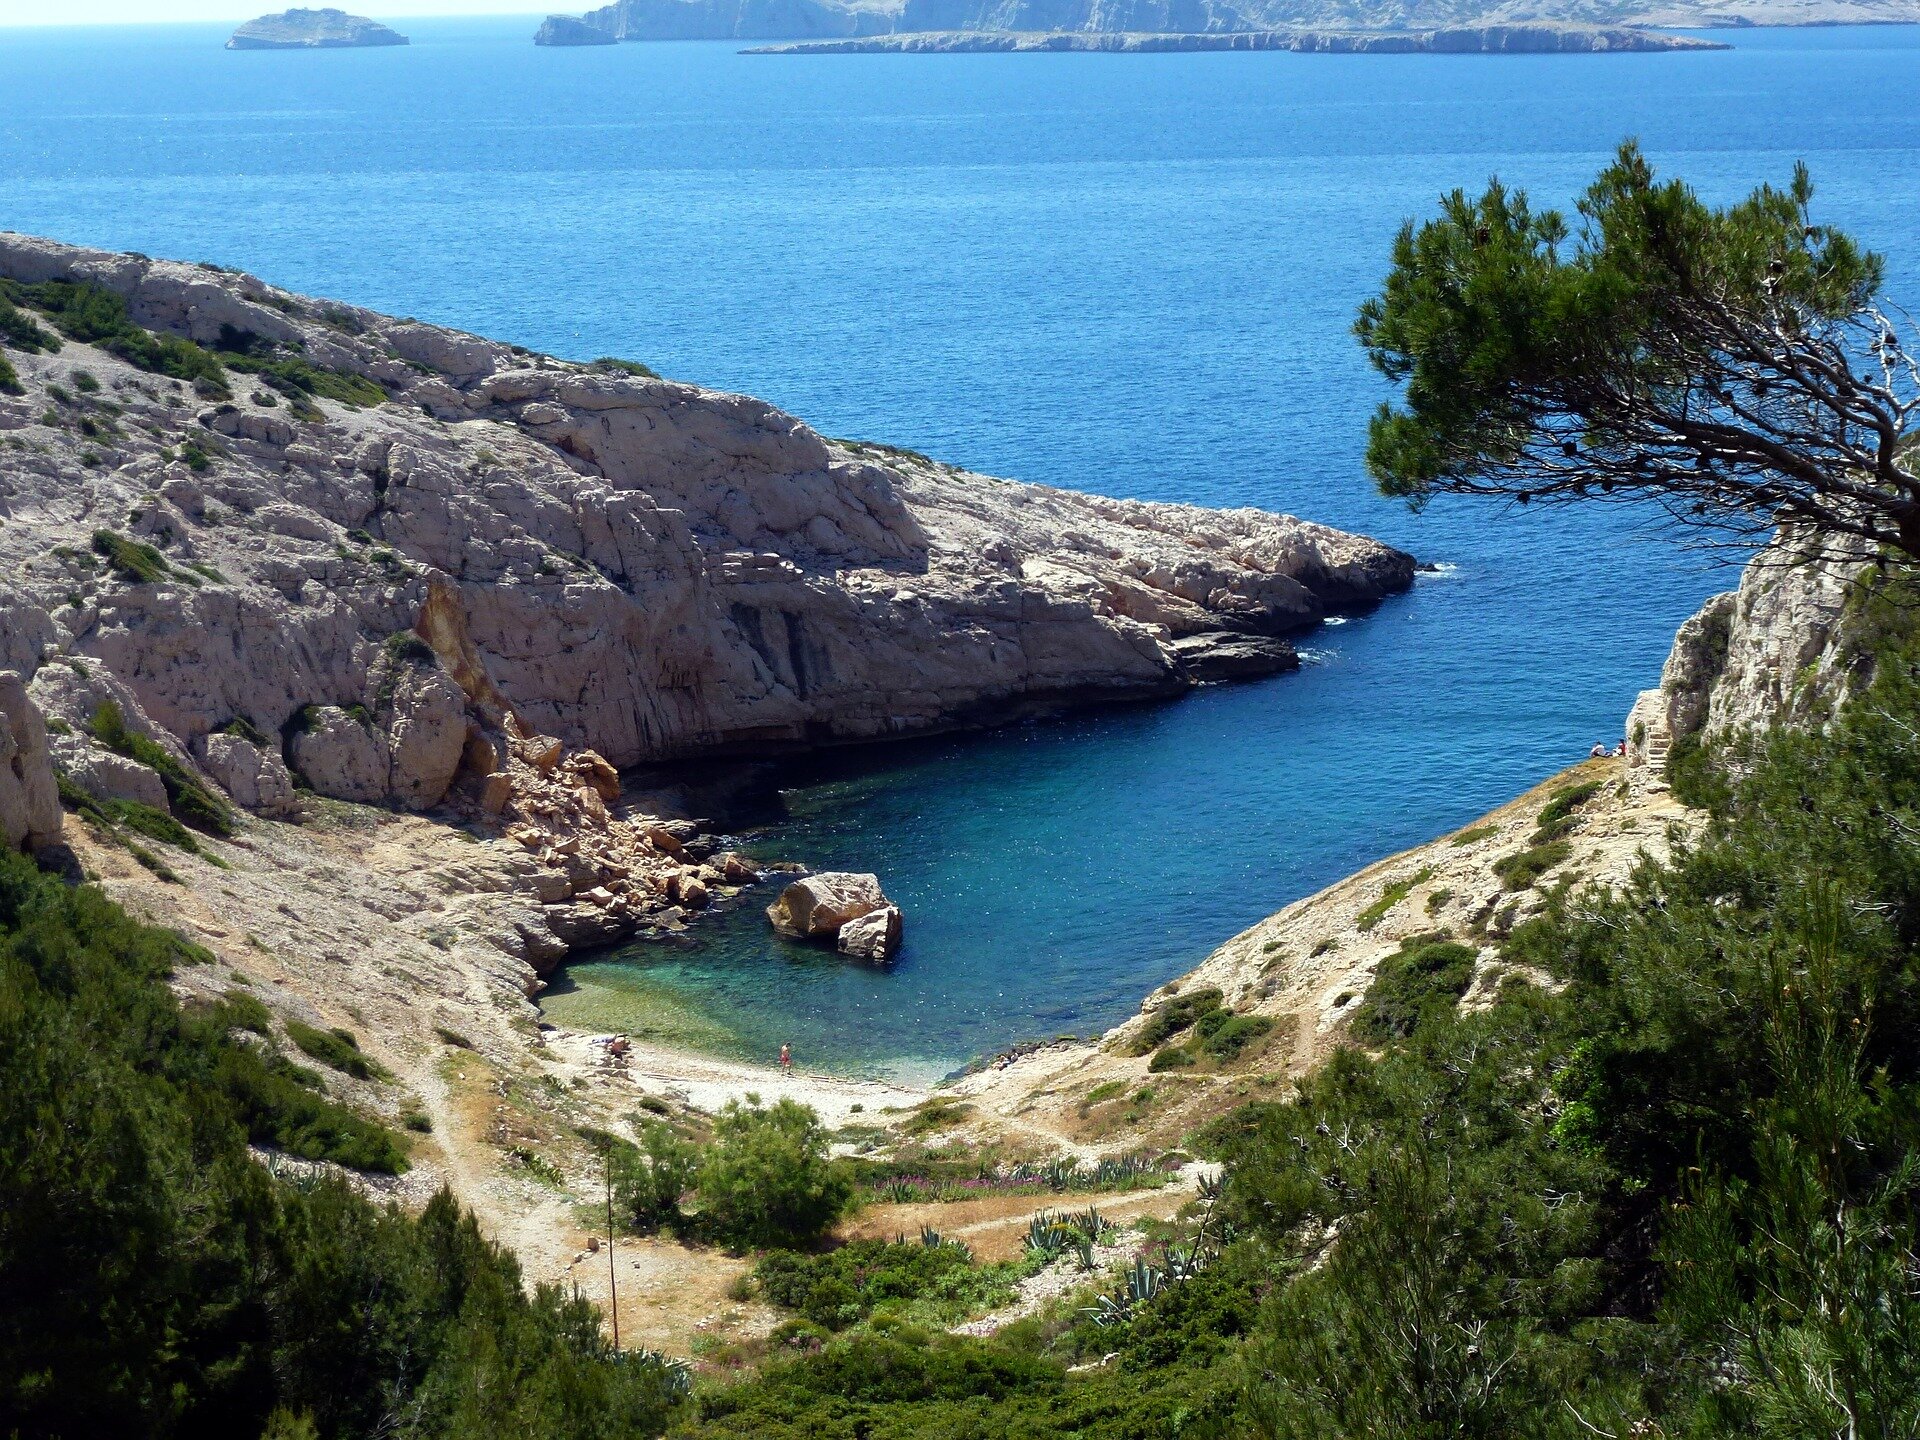 Marseille closes some beaches to swimming amid pollution concerns